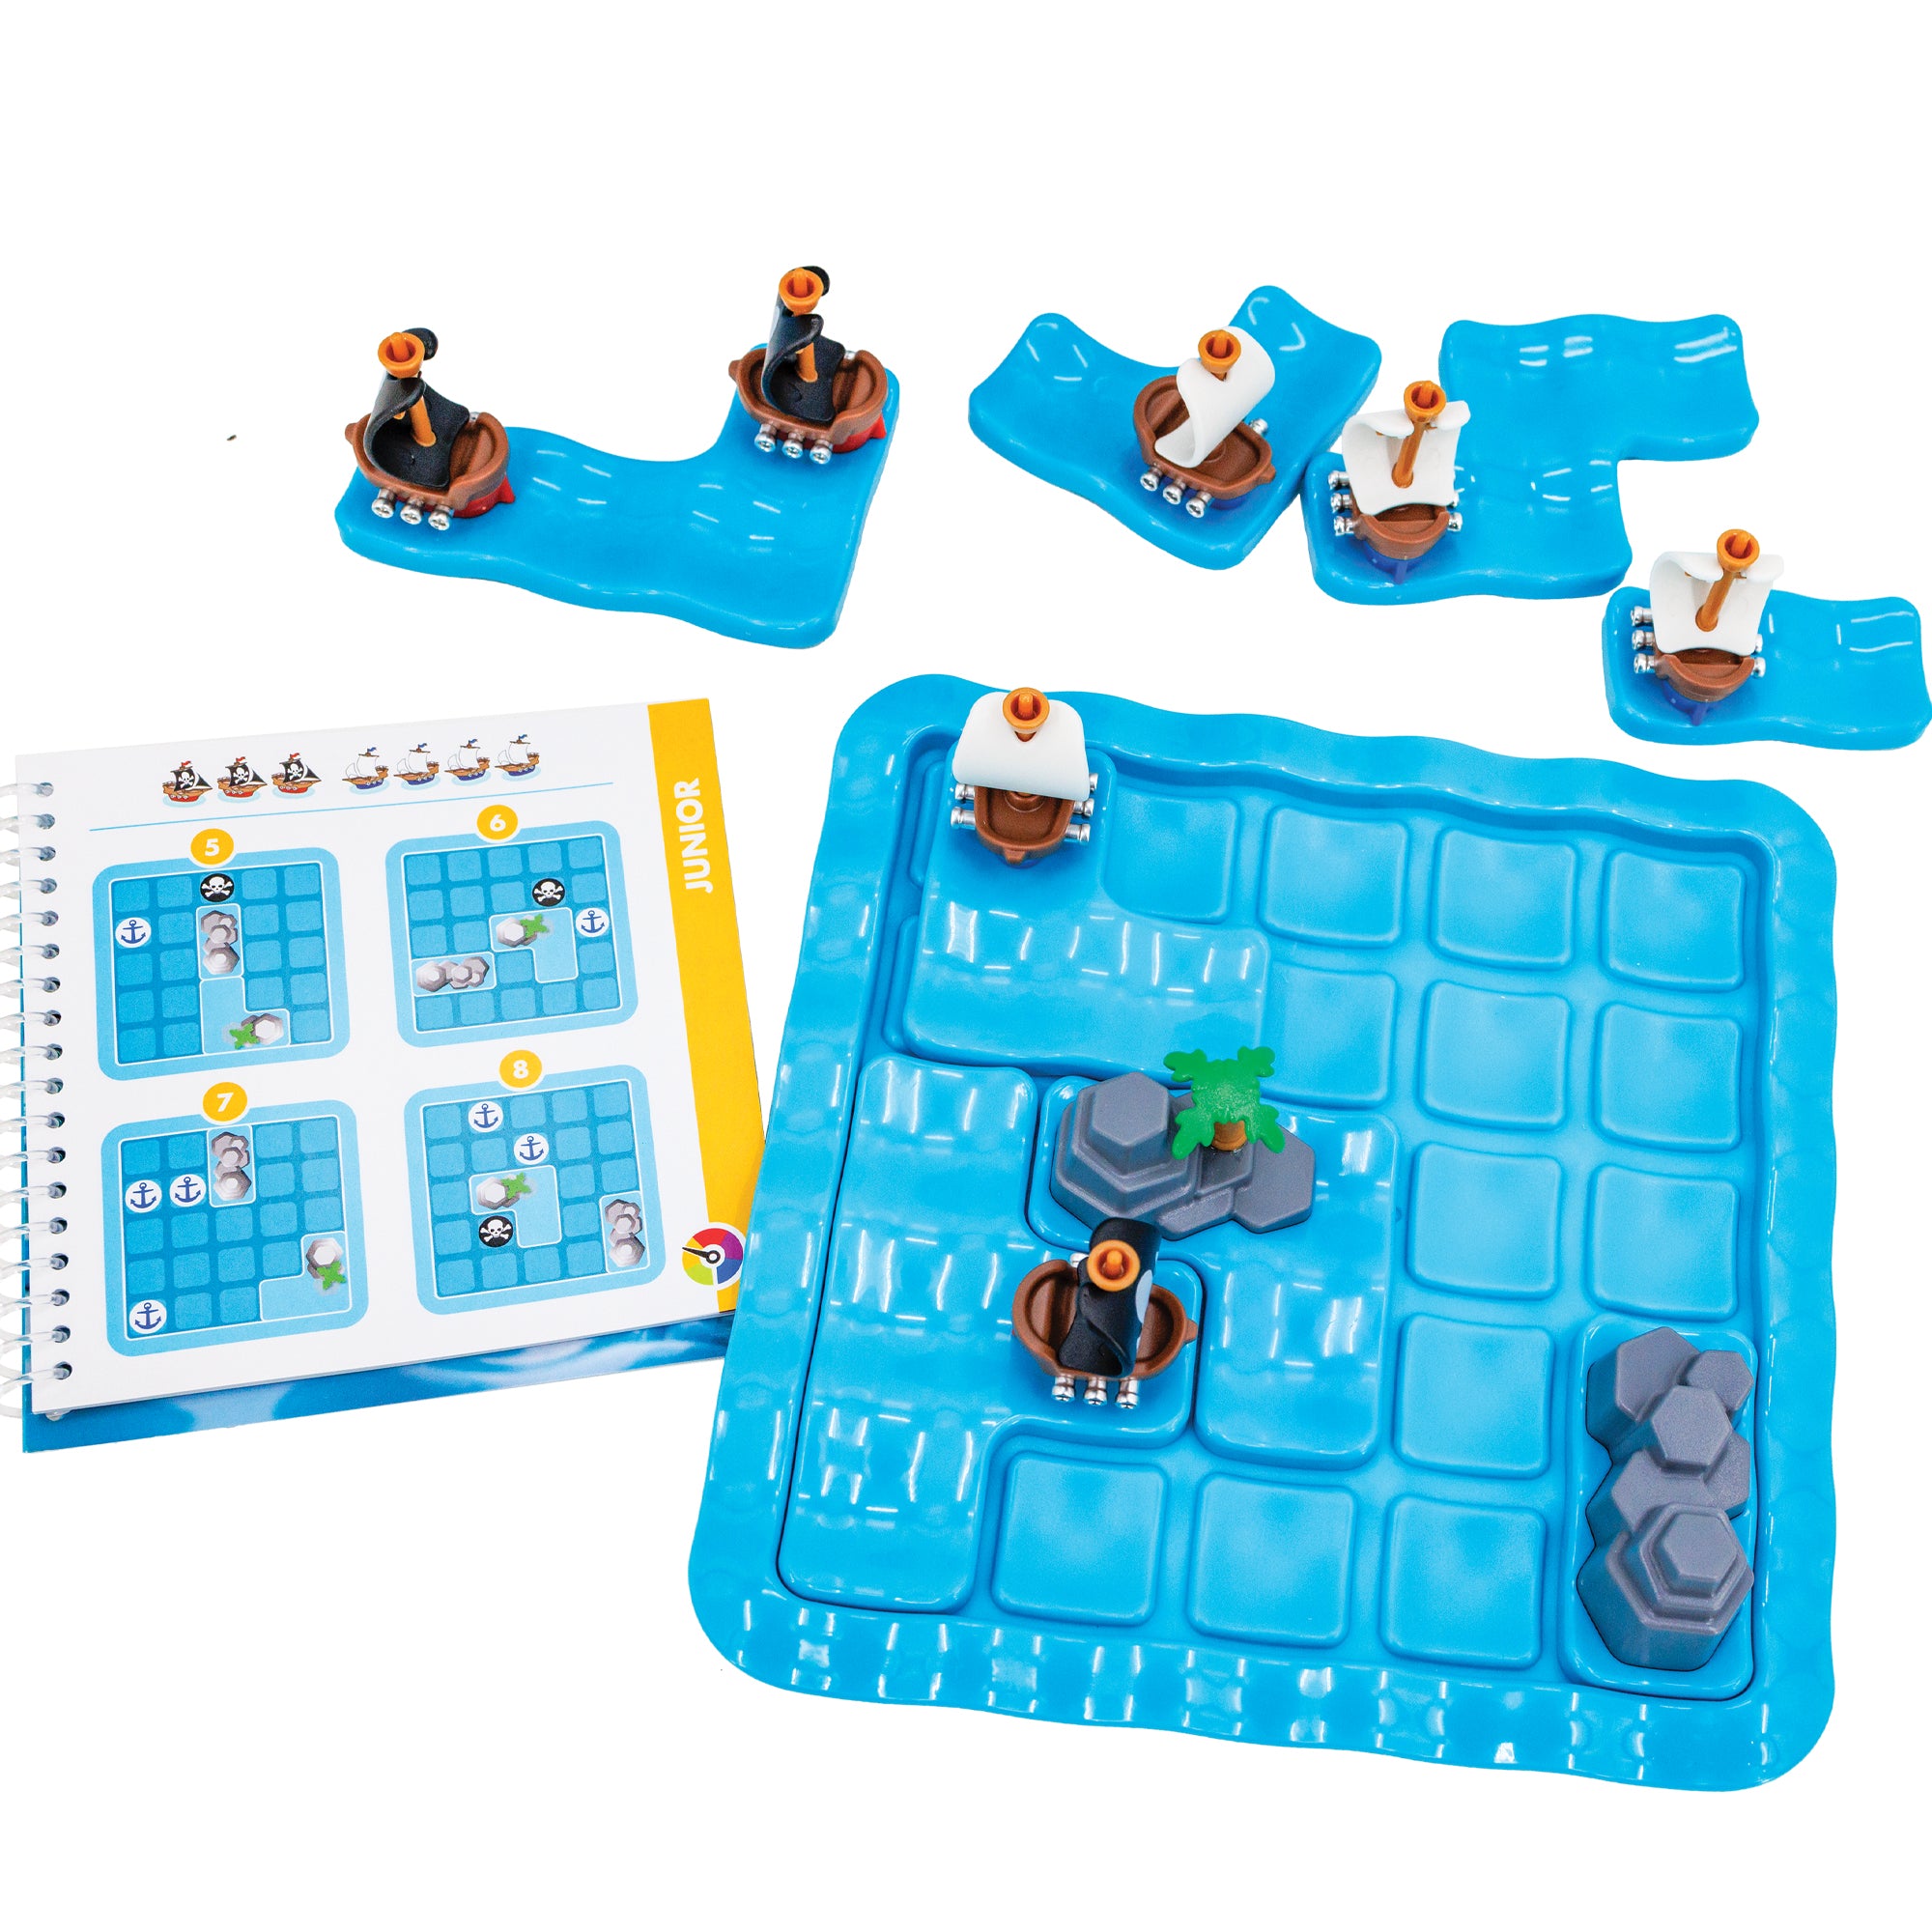 Pirates Crossfire game. The gameboard is blue and wavy in a square shape with rounded corners. There are 4 pieces set in place on the board; one white-sailed ship, one black-sailed ship, and 2 rock pieces. There are 4 ship pieces off the board to the top. On the left is the instruction booklet open to a junior puzzle.